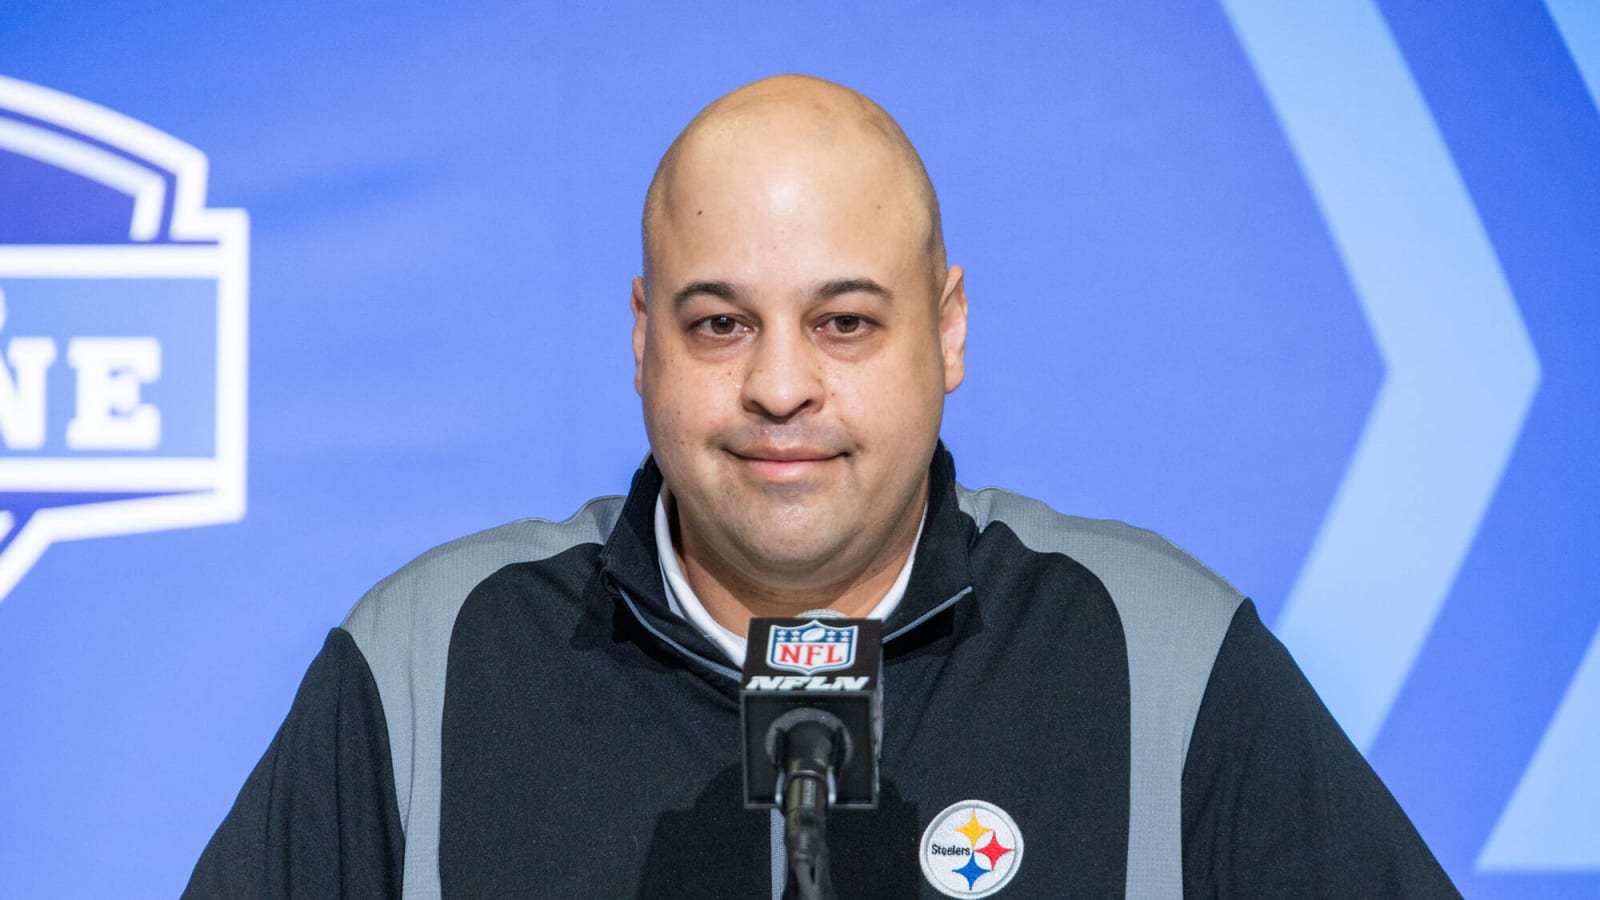 Offensive Strong AFC North Pushes Steelers And Ravens Into Fight Over 2023 NFL Draft Prospects